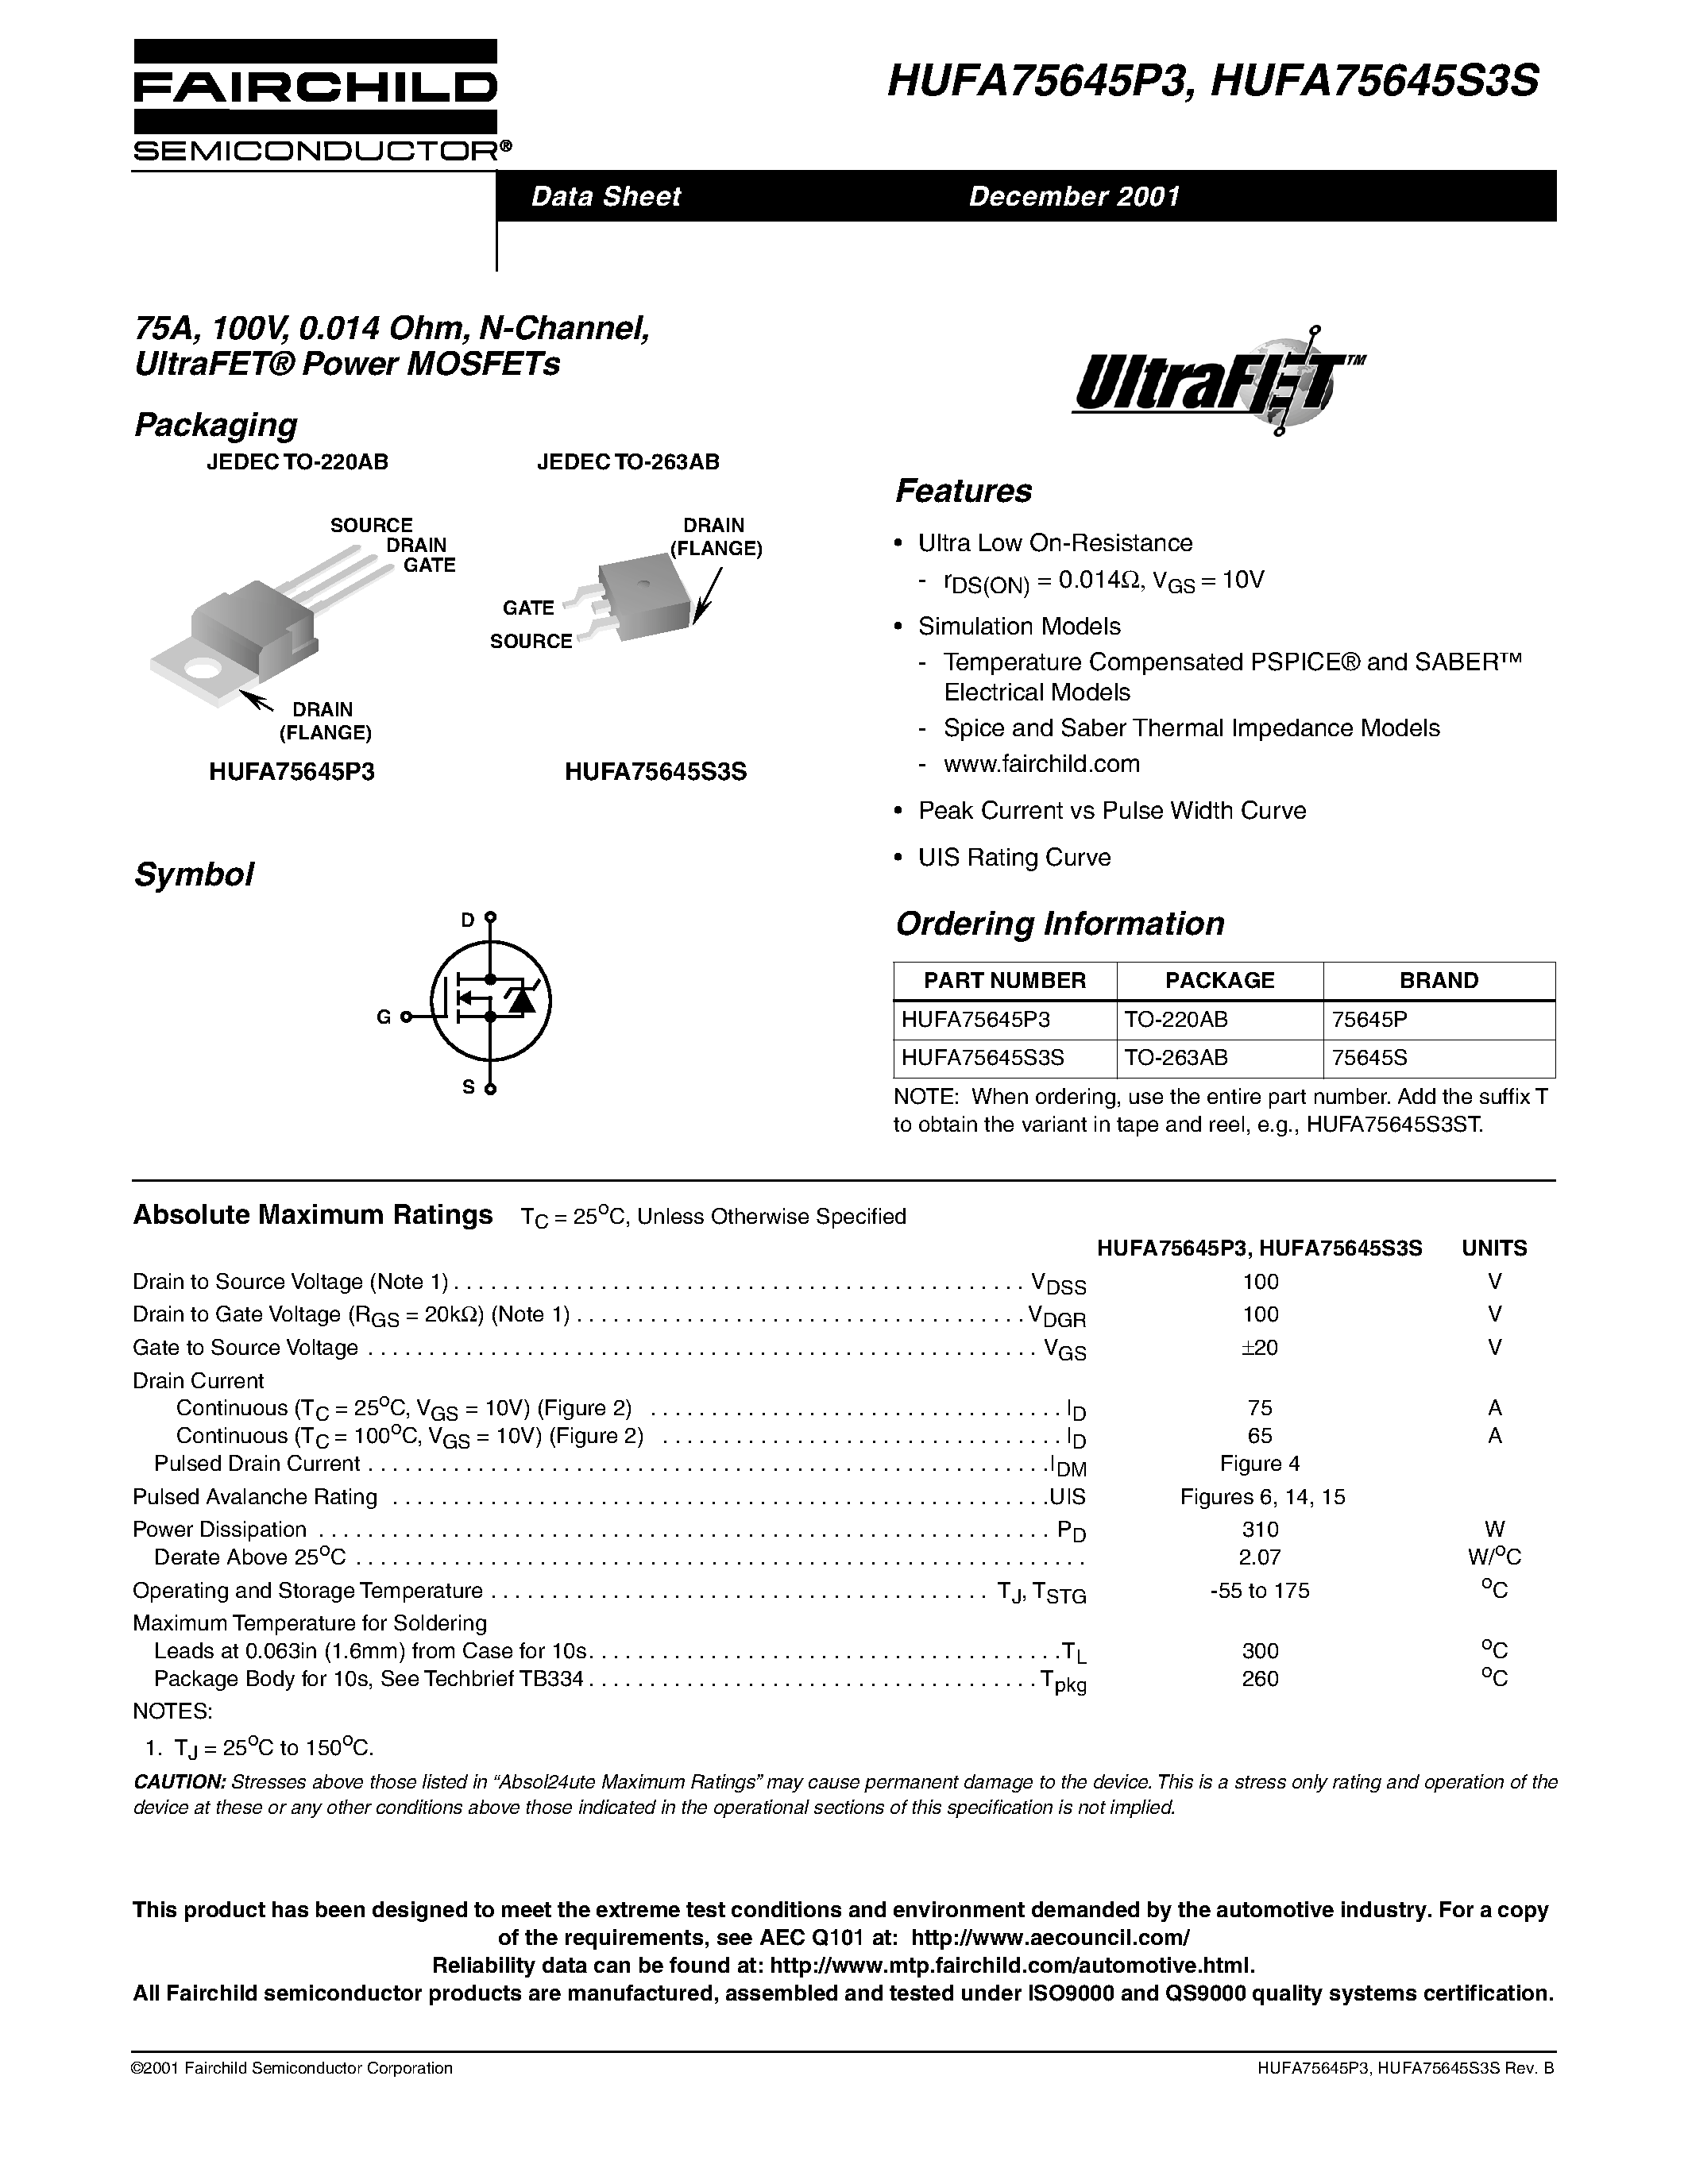 Datasheet HUFA75645P3 - 75A/ 100V/ 0.014 Ohm/ N-Channel/ UltraFET Power MOSFETs page 1